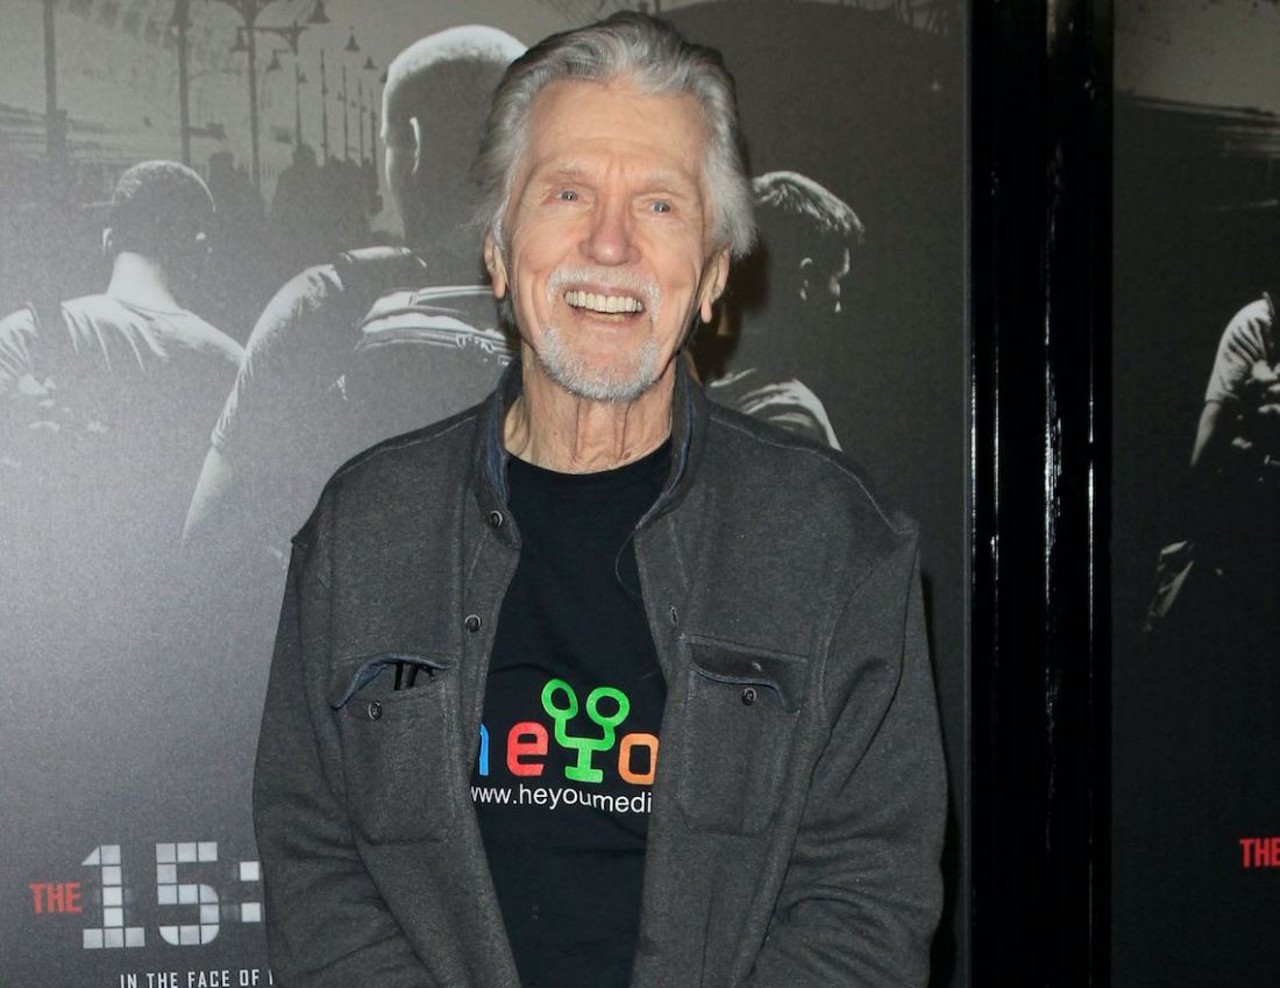 Mackenzie: Tom Skerritt
Tom Skerritt has starred in 40 films and over 200 television episodes. The Detroit Mackenzie High School graduate and Wayne State University attendee’s career has included memorable roles in M*A*S*H, Alien, Top Gun, and more. Mackenzie High School ceased operations in 2007. 